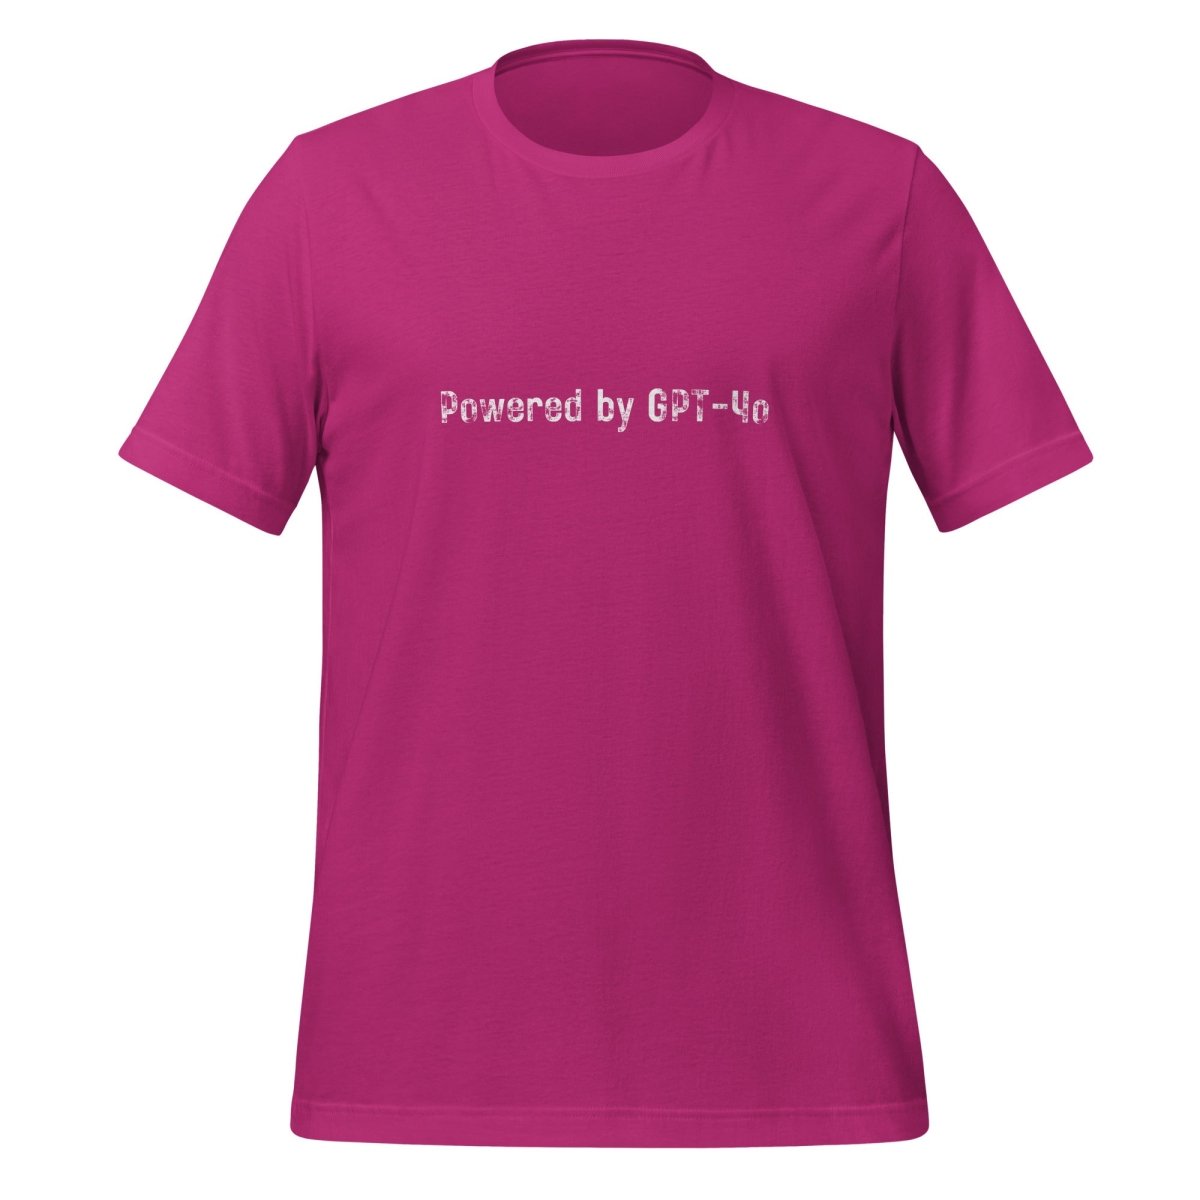 Powered by GPT - 4o T - Shirt 2 (unisex) - Berry - AI Store